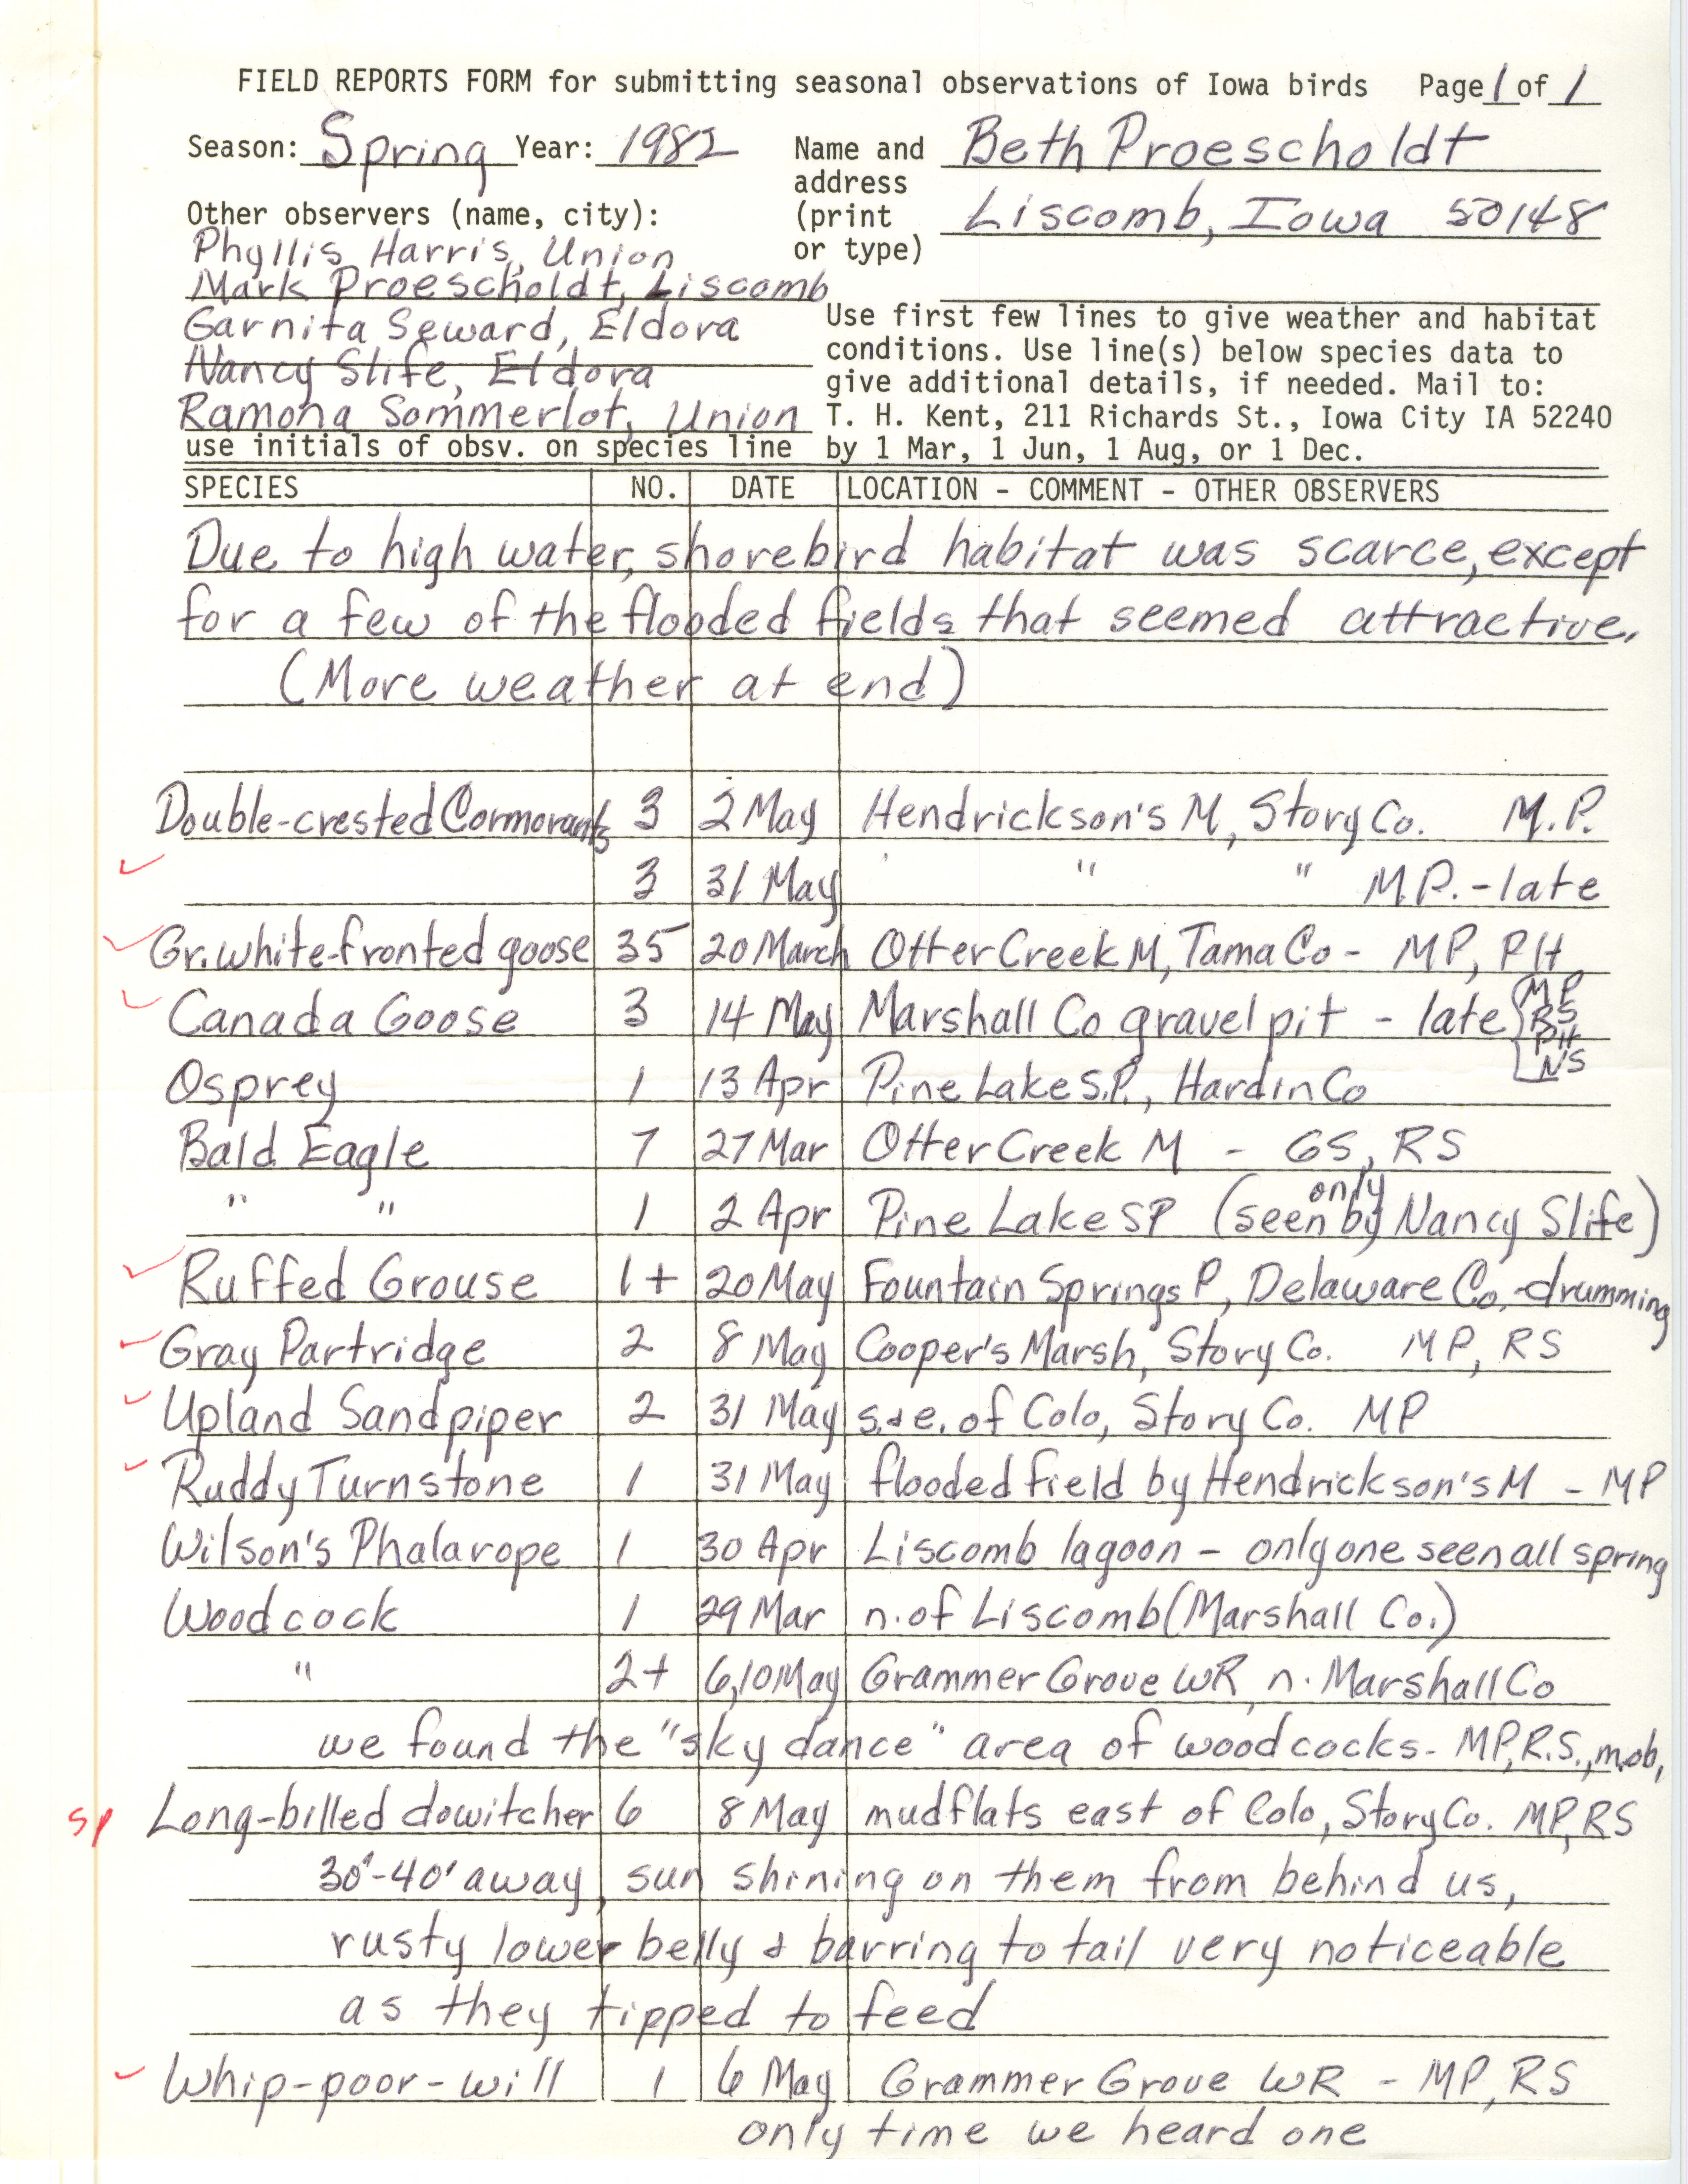 Field notes contributed by Beth Proescholdt, spring 1982